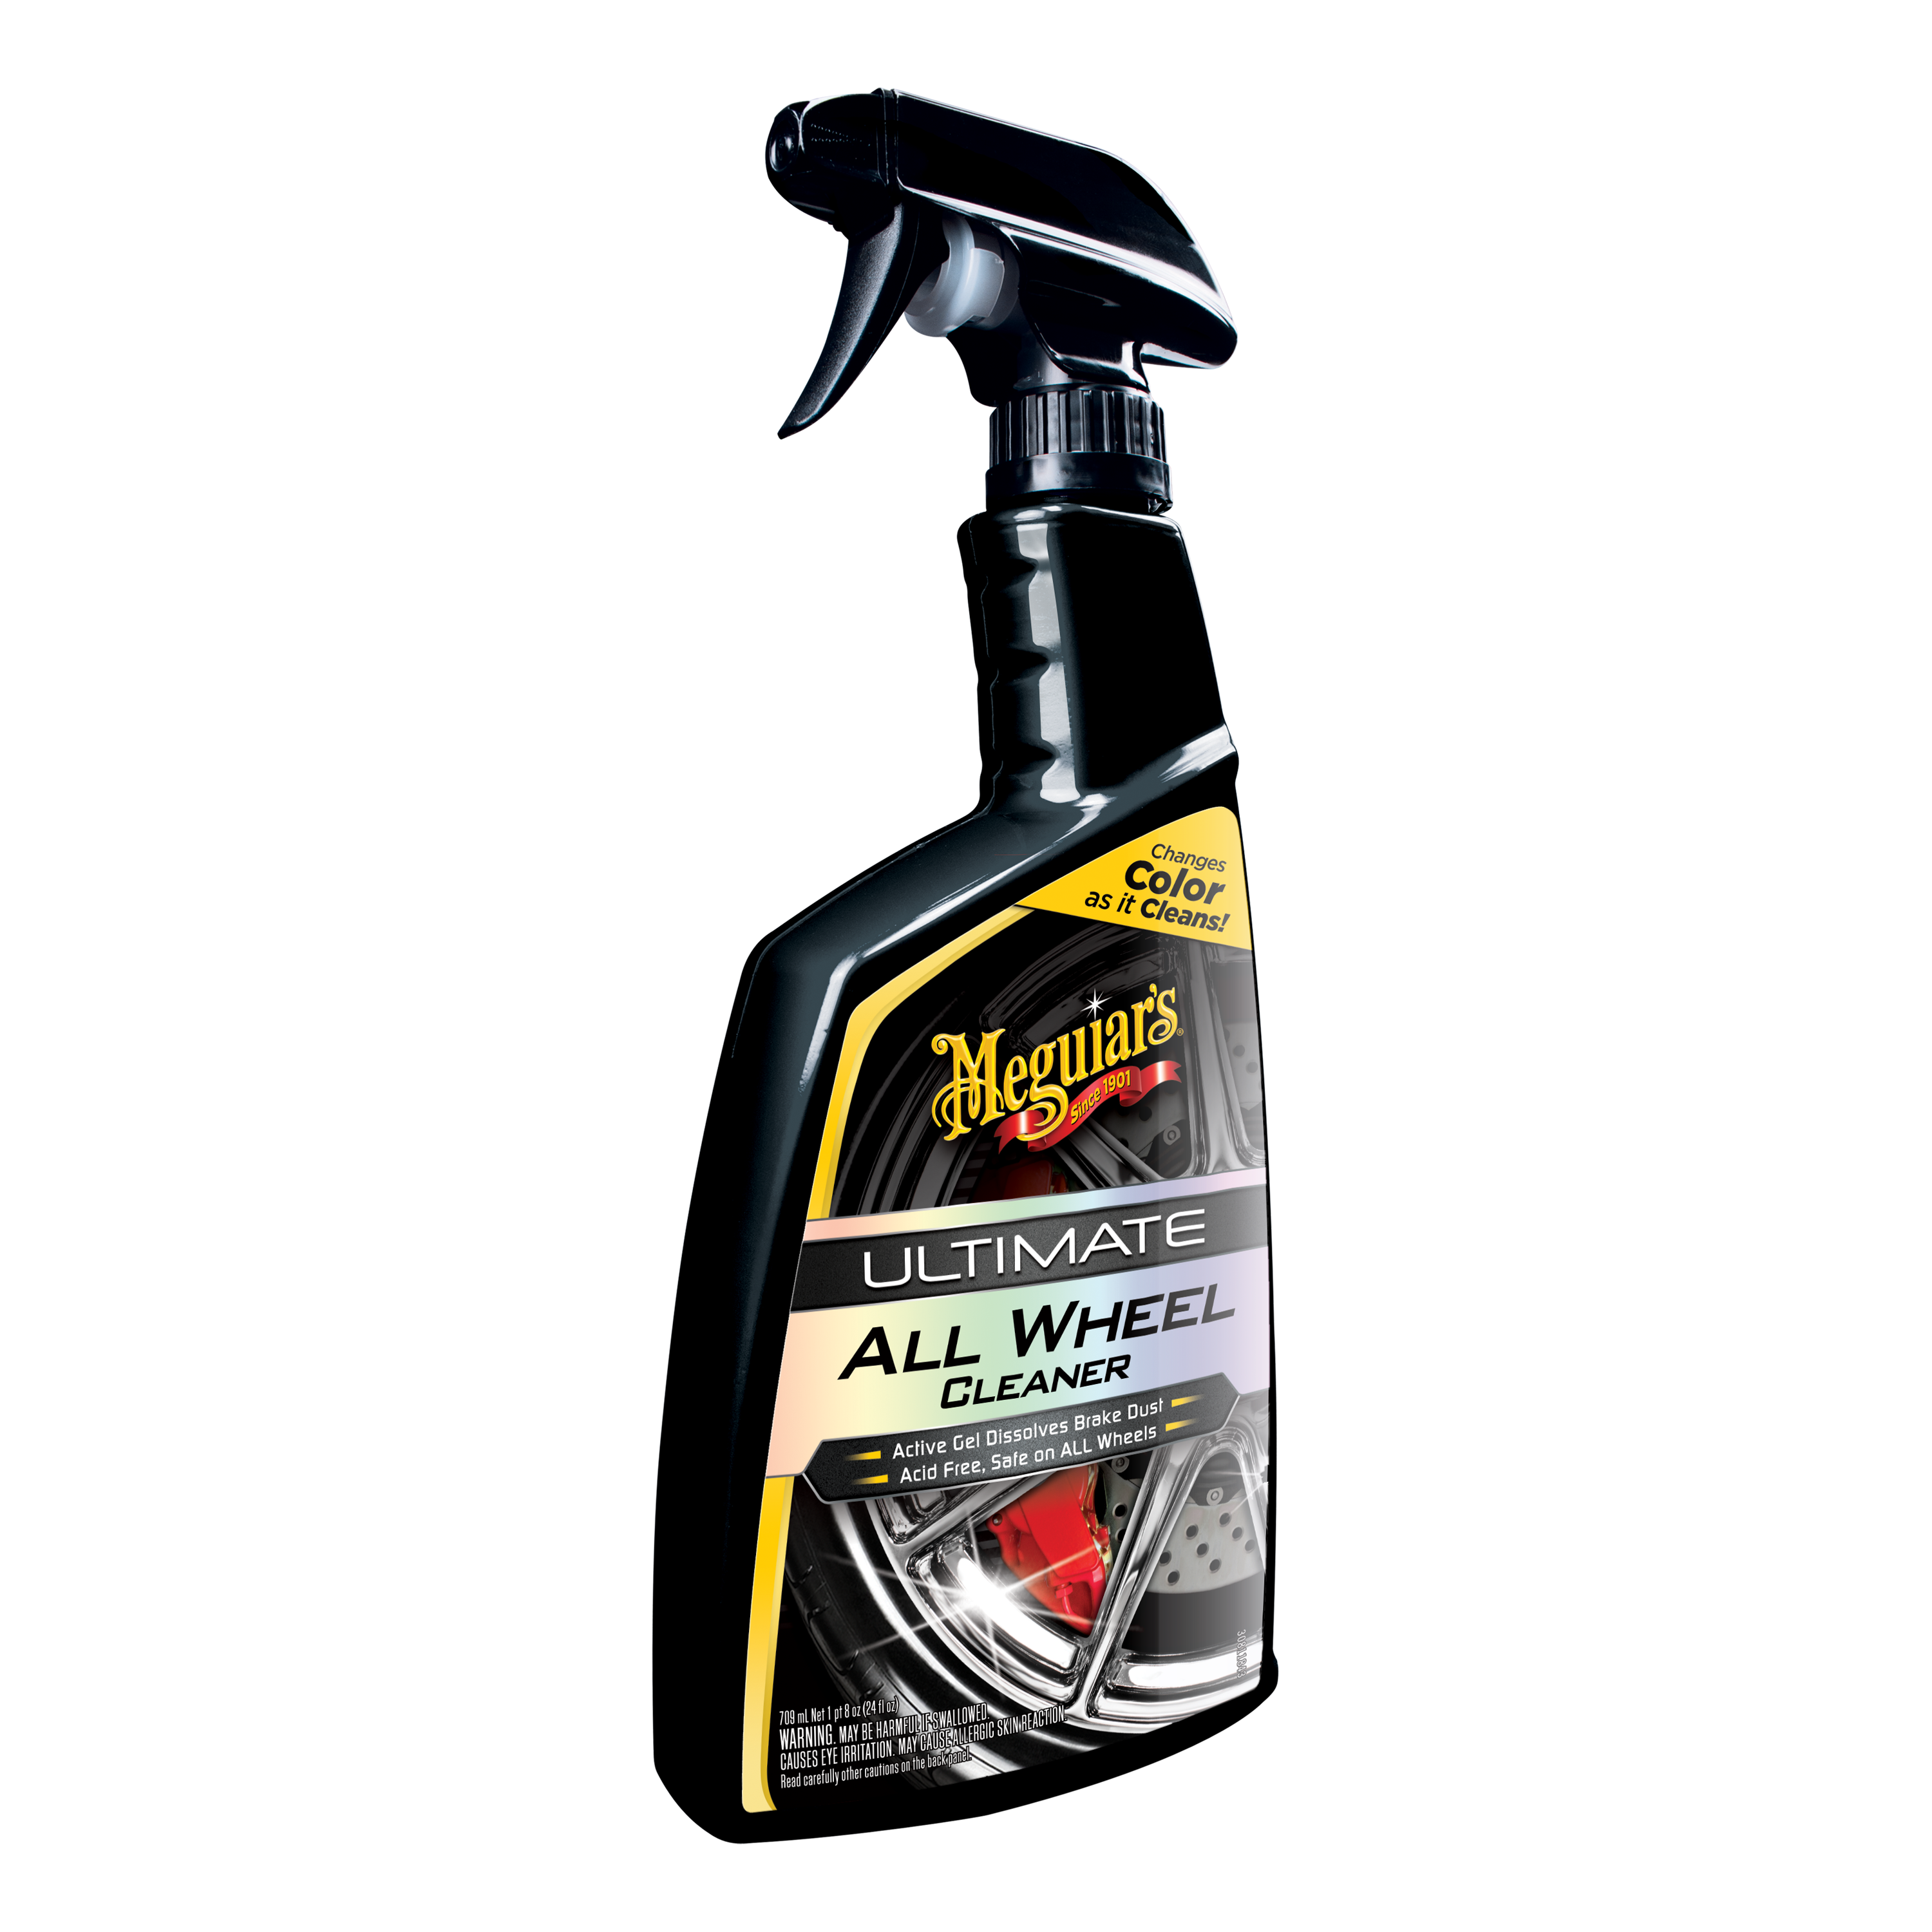 Meguiar's Ultimate All Wheel Cleaner - 710mL - G180124 - Auto One